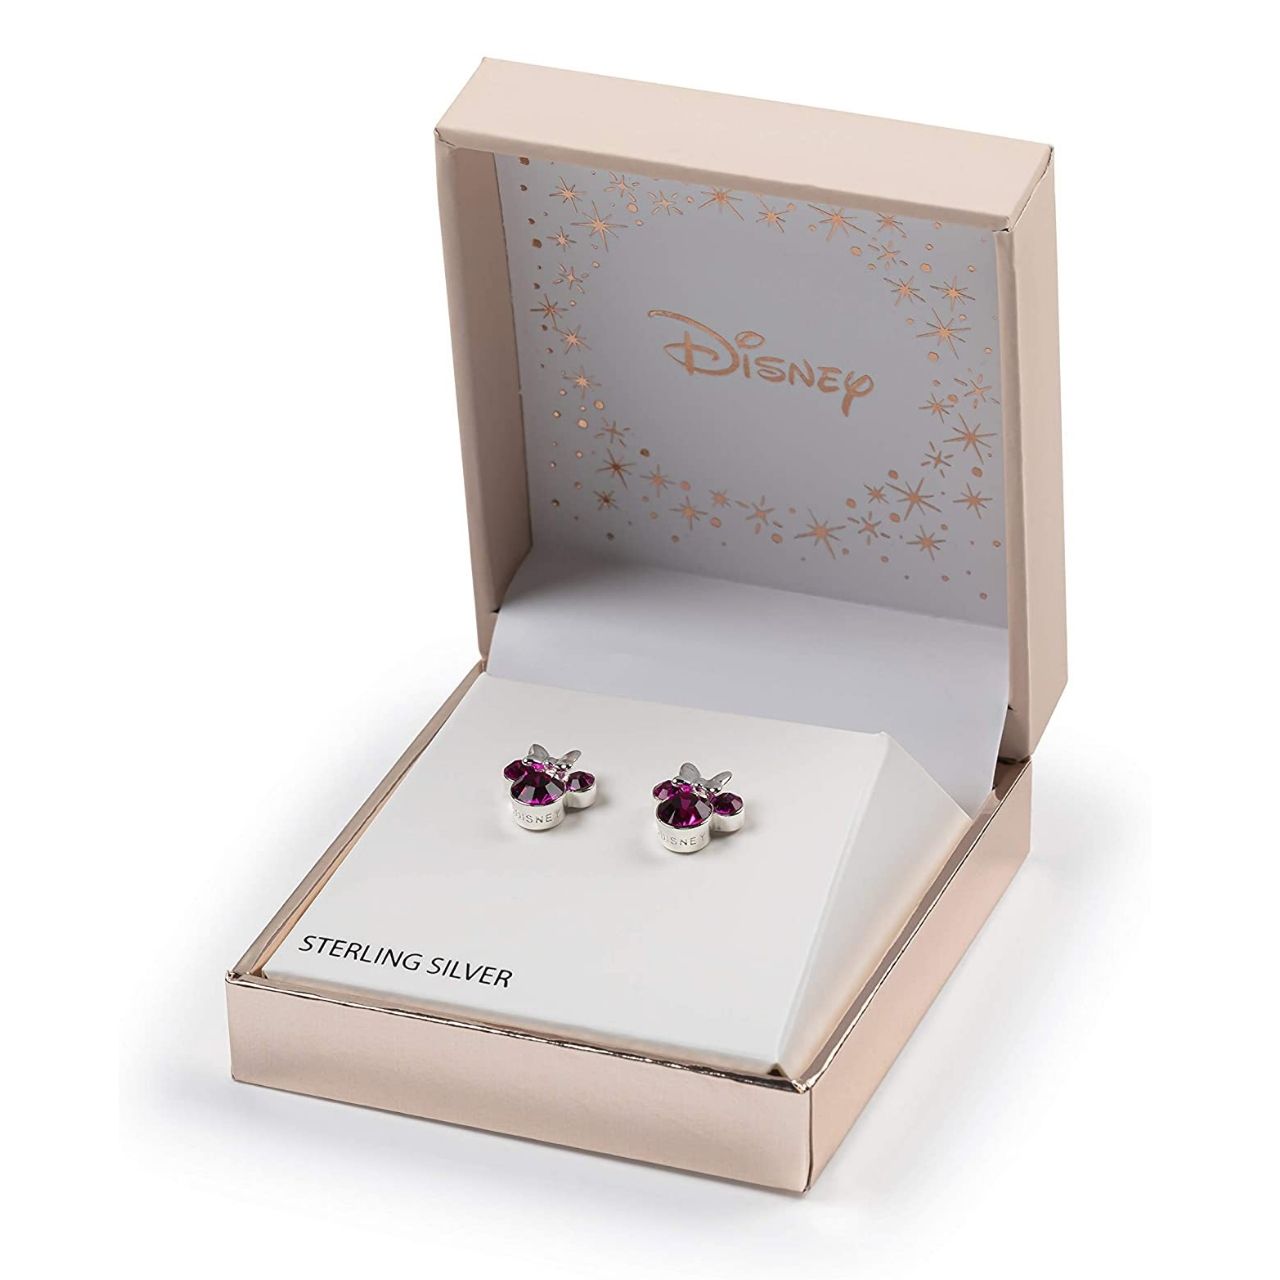 Disney Minnie Mouse Sterling Silver Birthstone Earrings Pink Rose  Pink Rose October Birthstone  Stunning silver Birthstone earrings form a silhouette of Minnie Mouse with pink rose CZ Crystals adding a feminine touch to the Disney classic piece of Jewellery.  Trendy and fashionable design, the Disney Minnie Mouse silhouette sterling silver earrings add a chic, fun touch to any outfit.